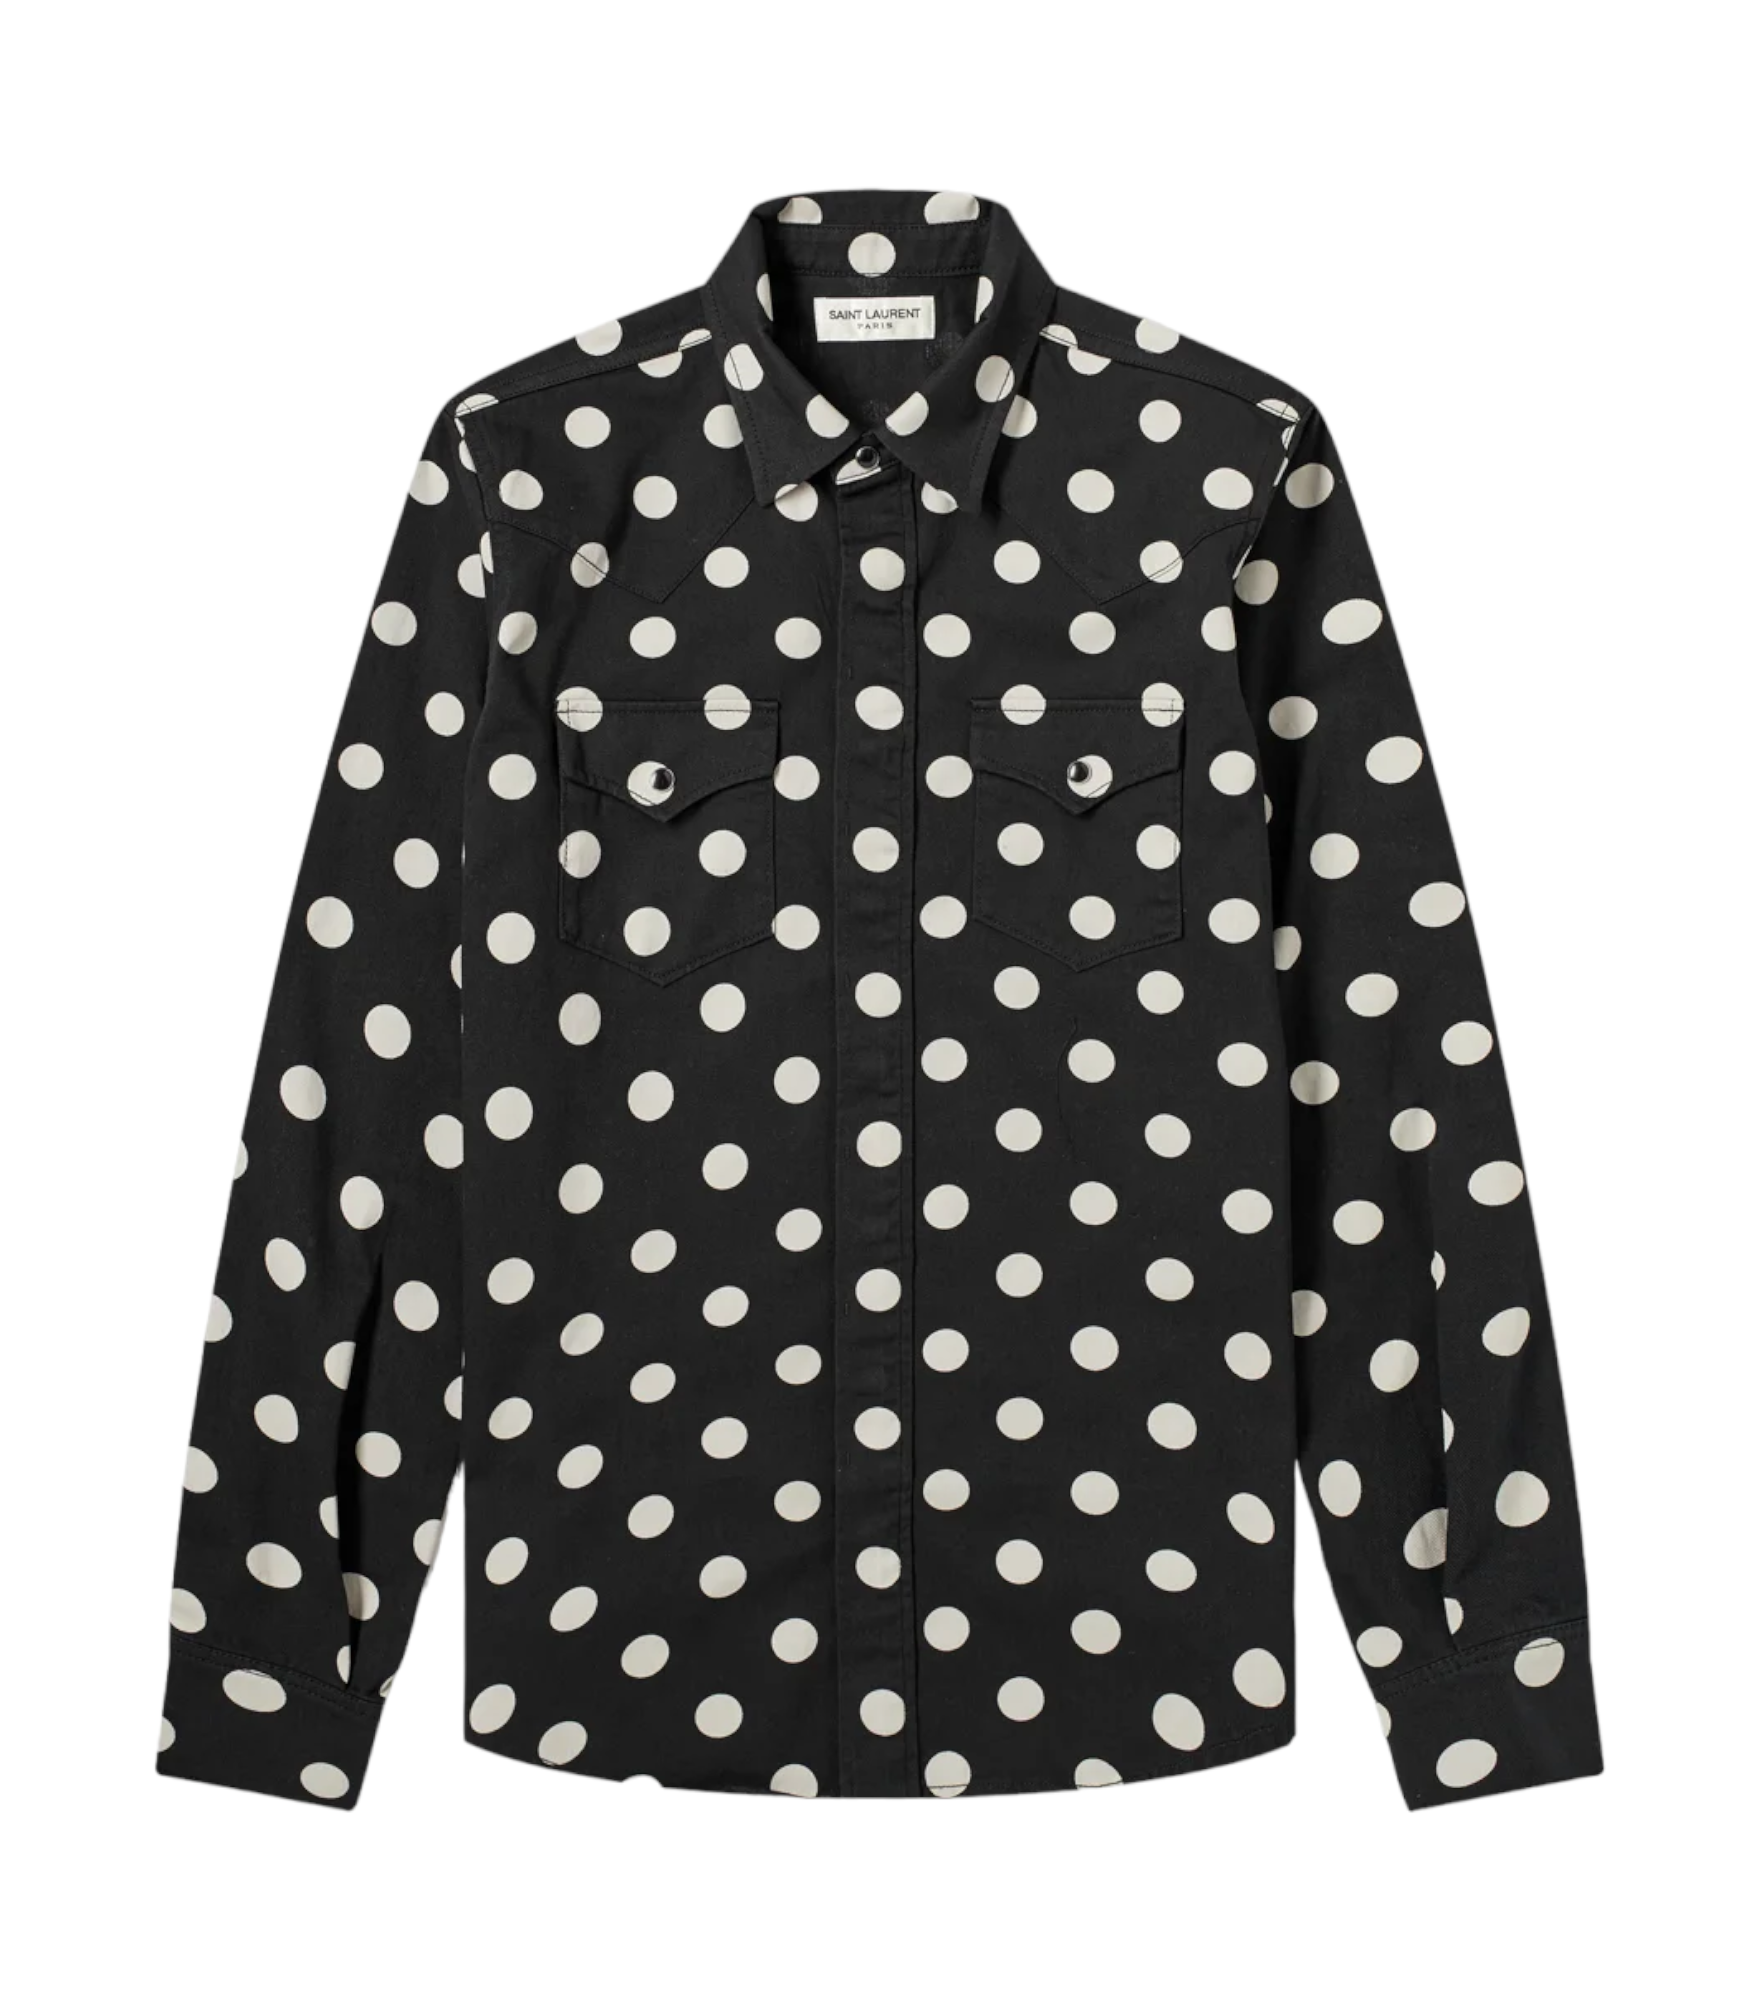 Saint Laurent Western Shirt in Dotted Black Enzyme